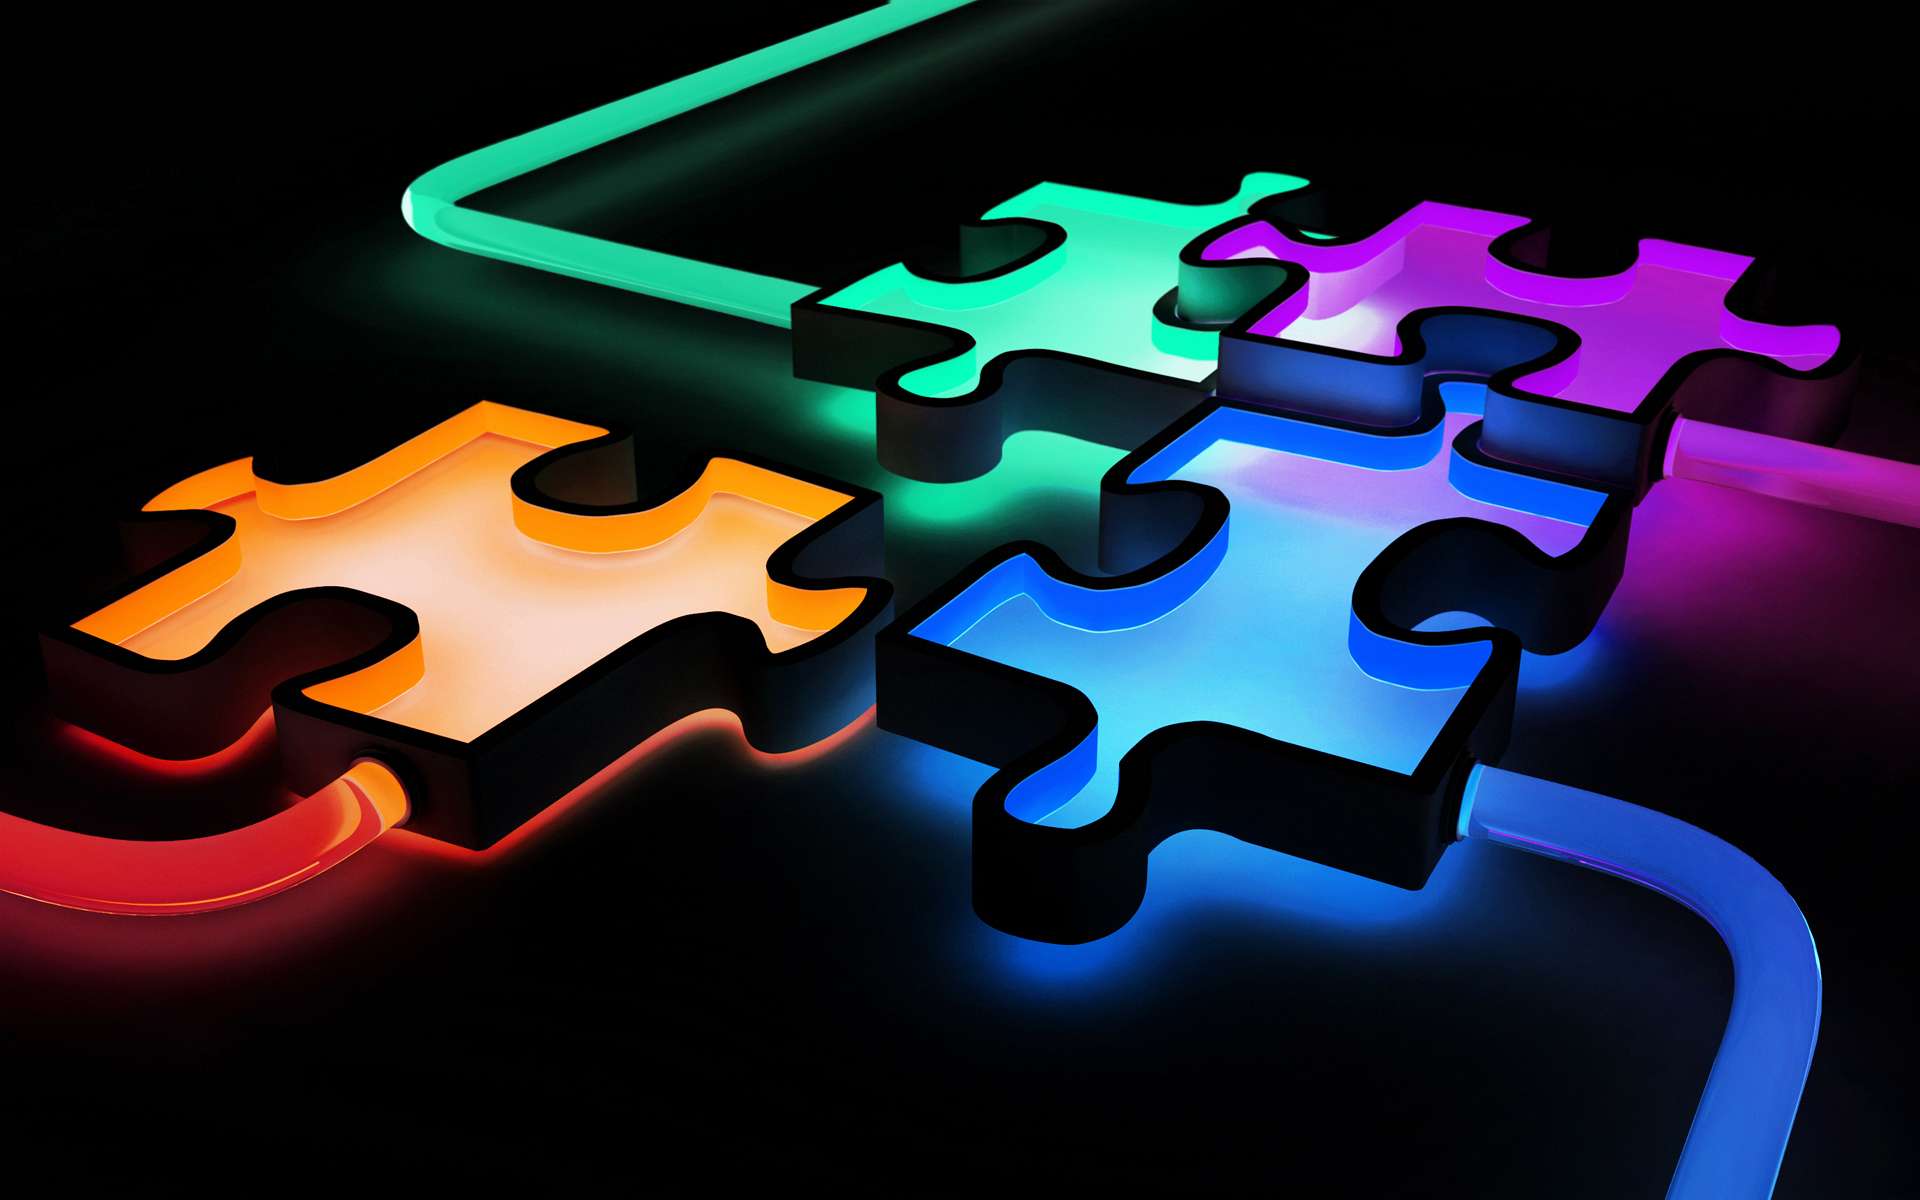 Puzzle Piece Wallpapers Top Free Puzzle Piece Backgrounds